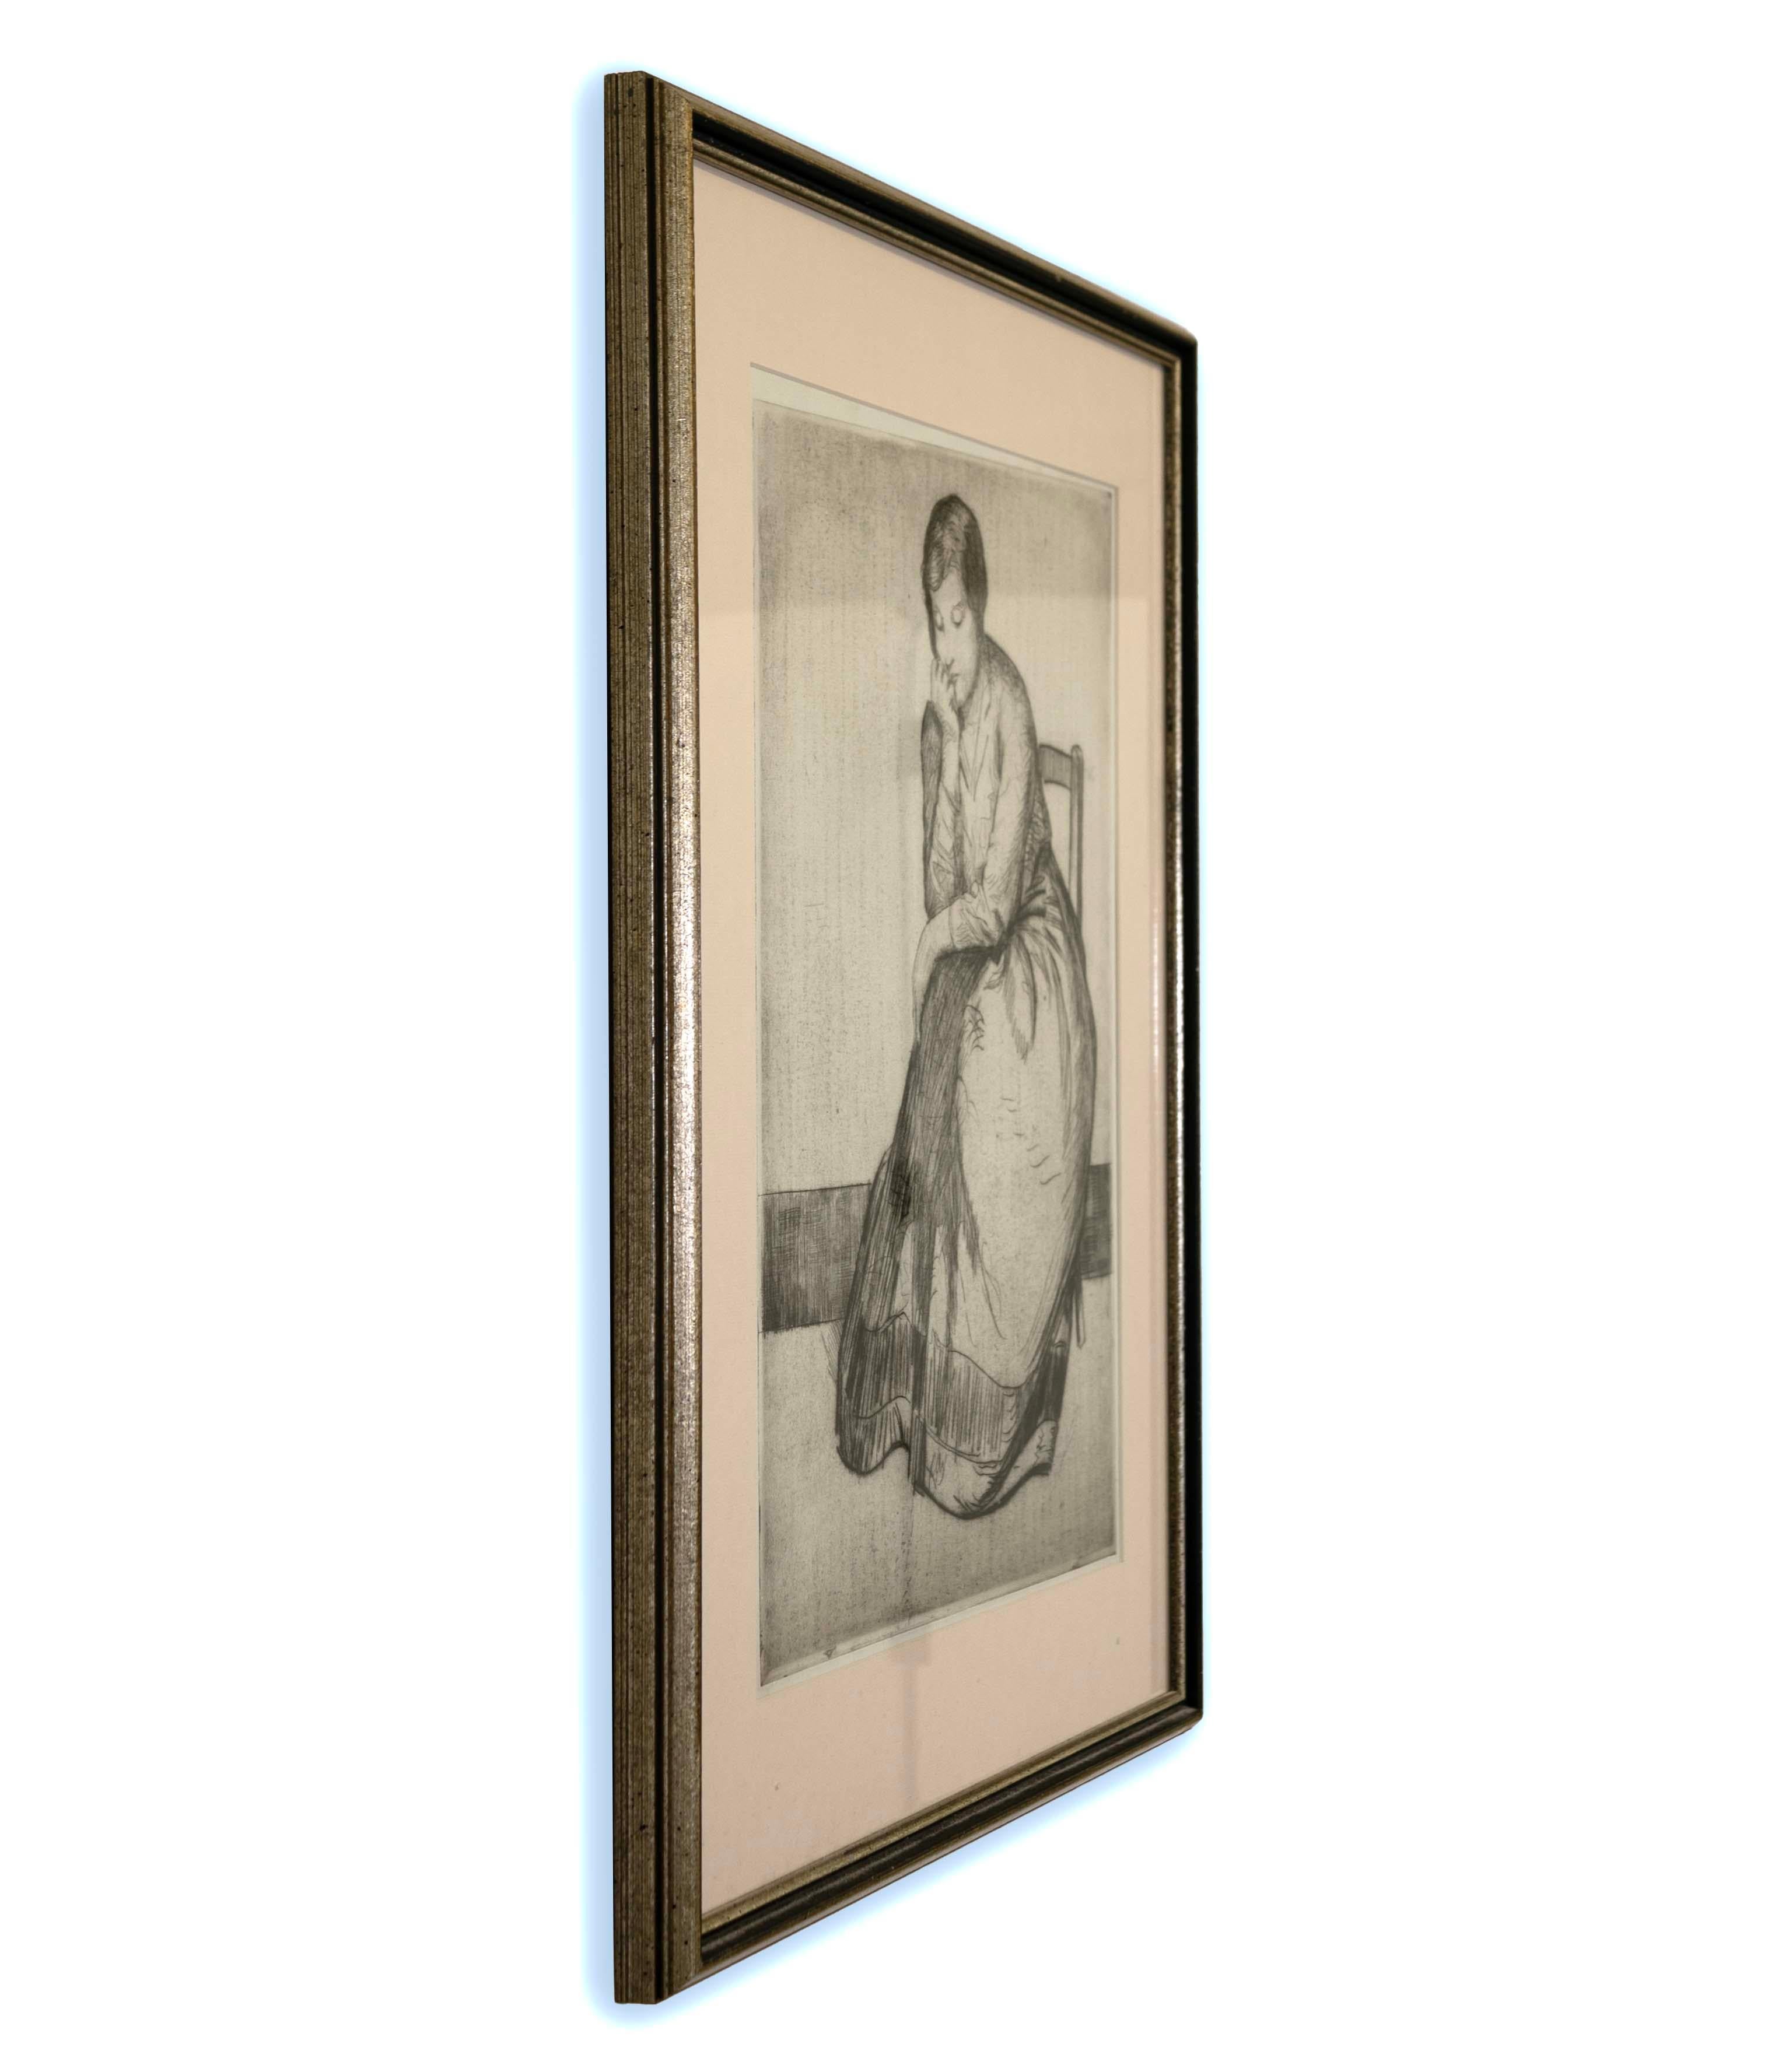 Myron Barlow Seated Woman Signed Vintage Etching on Paper American Realism 1920s For Sale 2